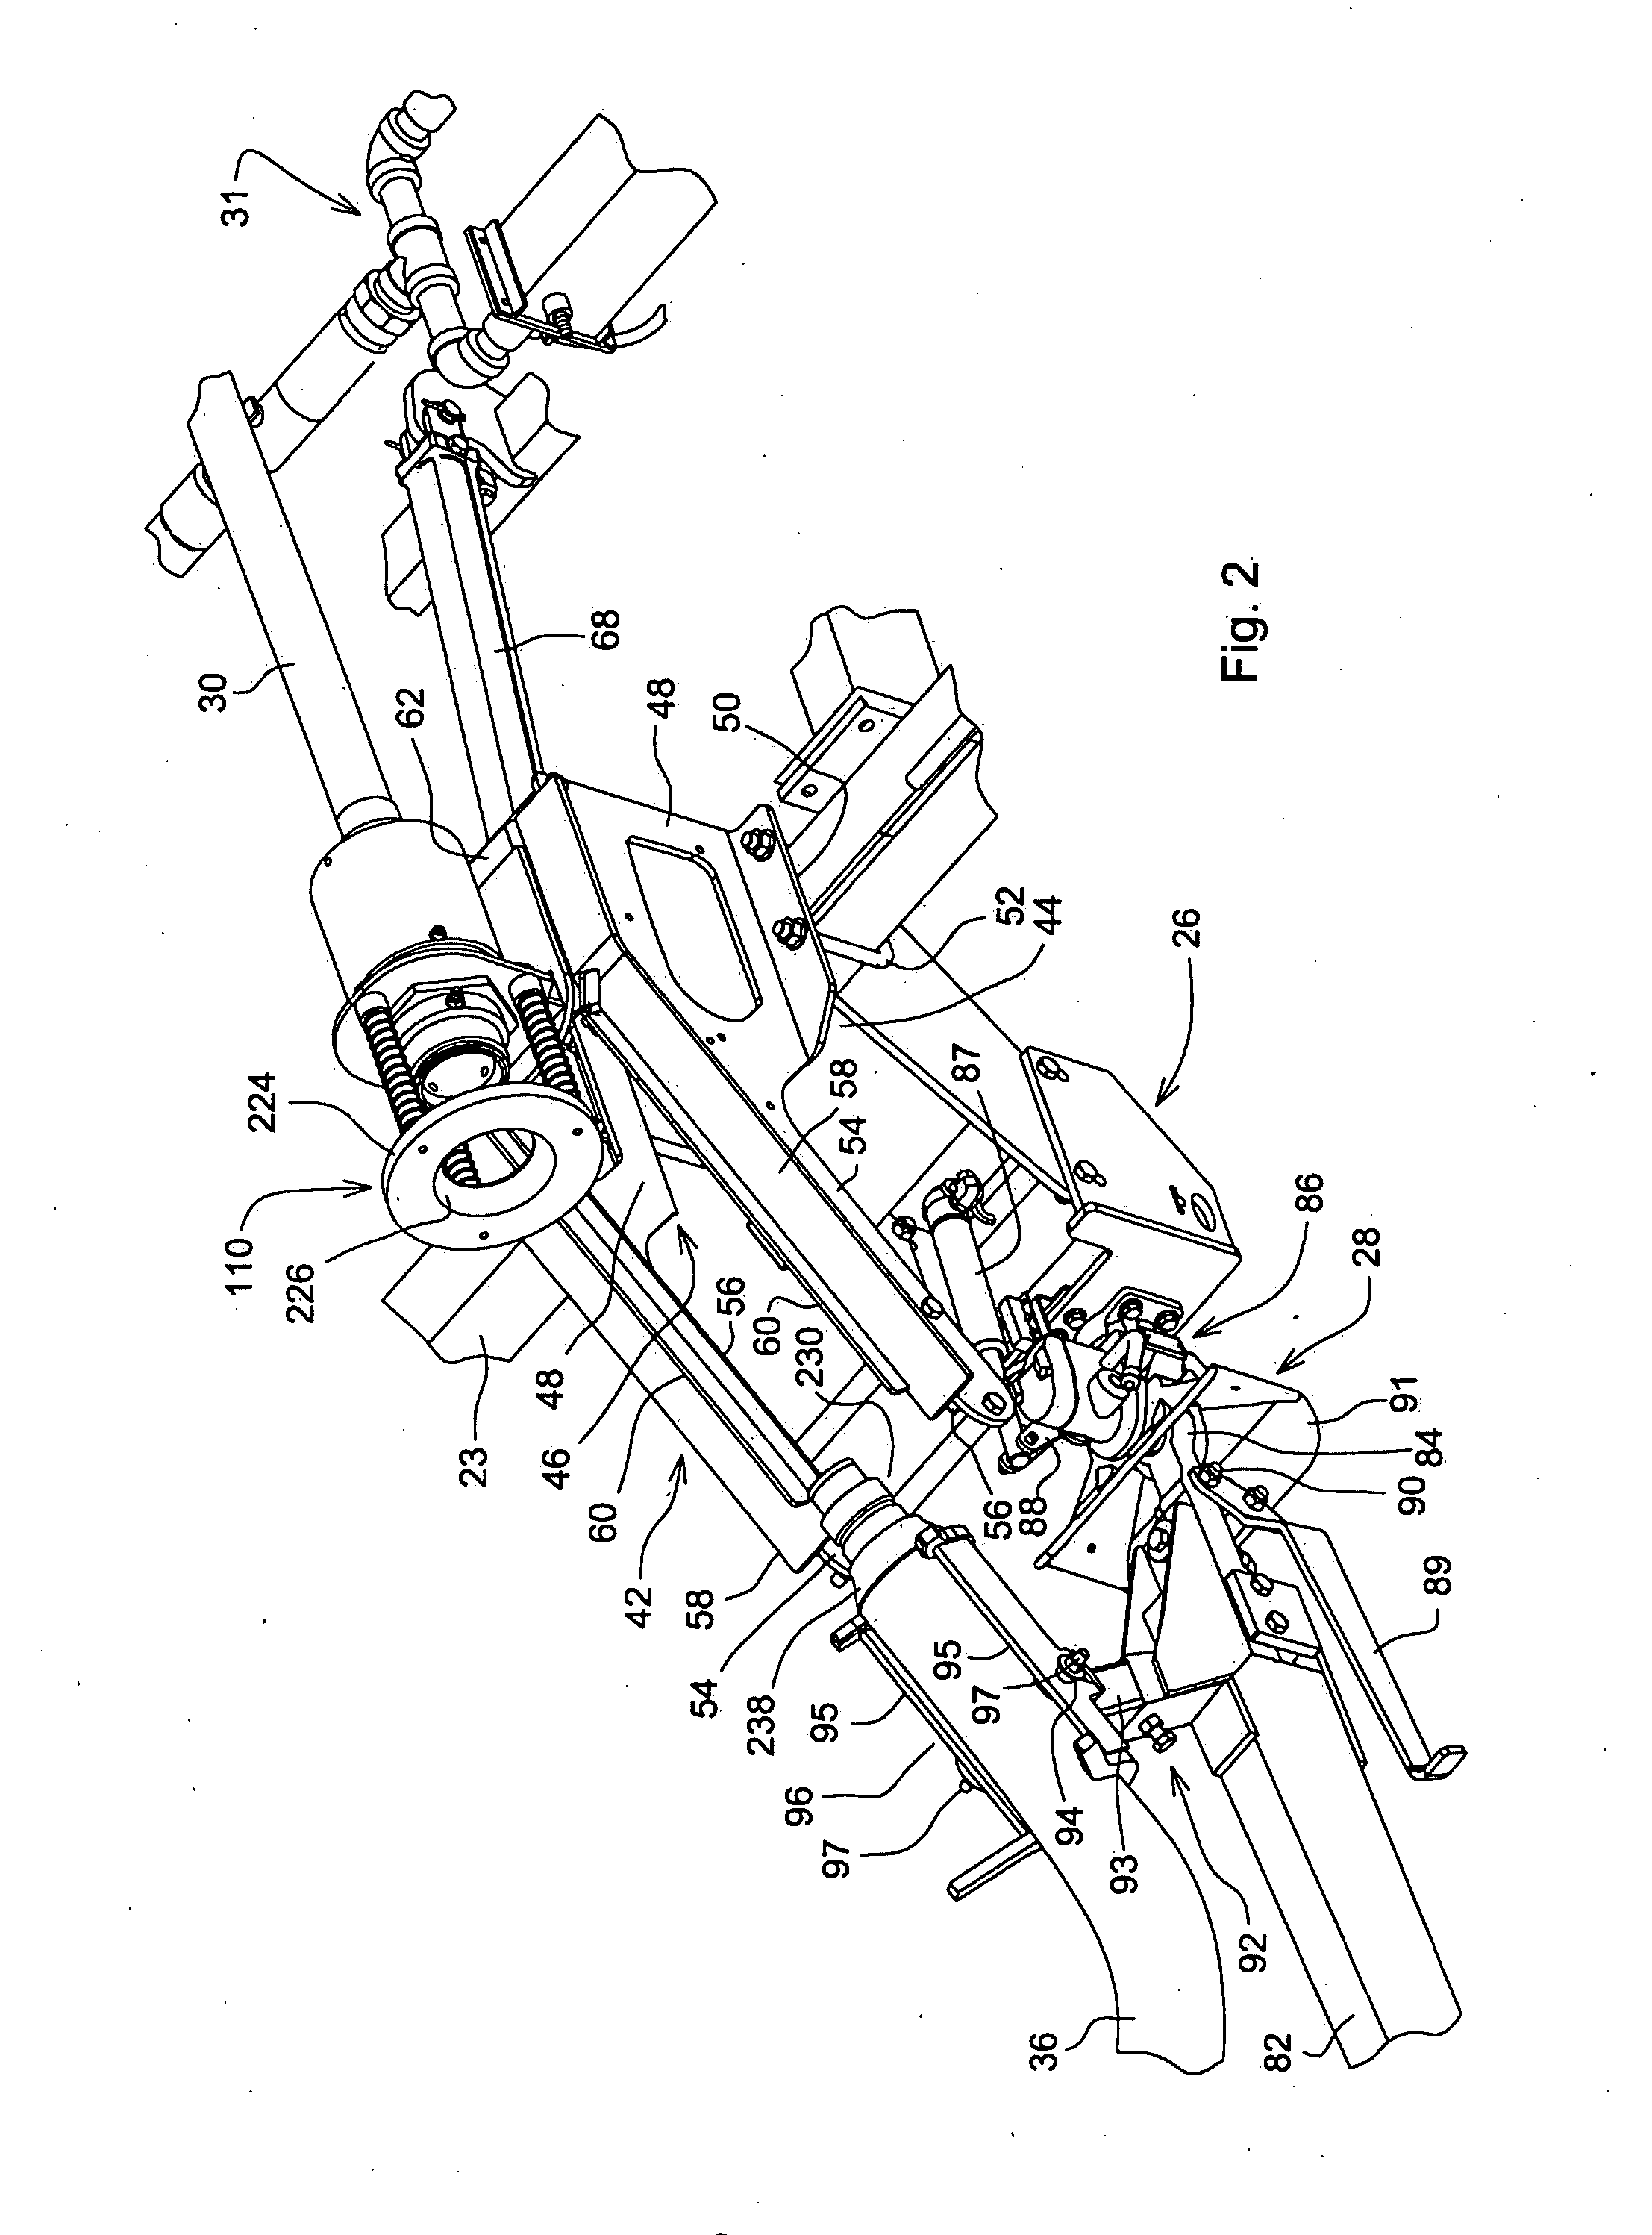 Hitch and coupling arrangement for automatically effecting towing hitch and fluid quick-coupler connections between a nurse tank wagon and an nh3 applicator implement